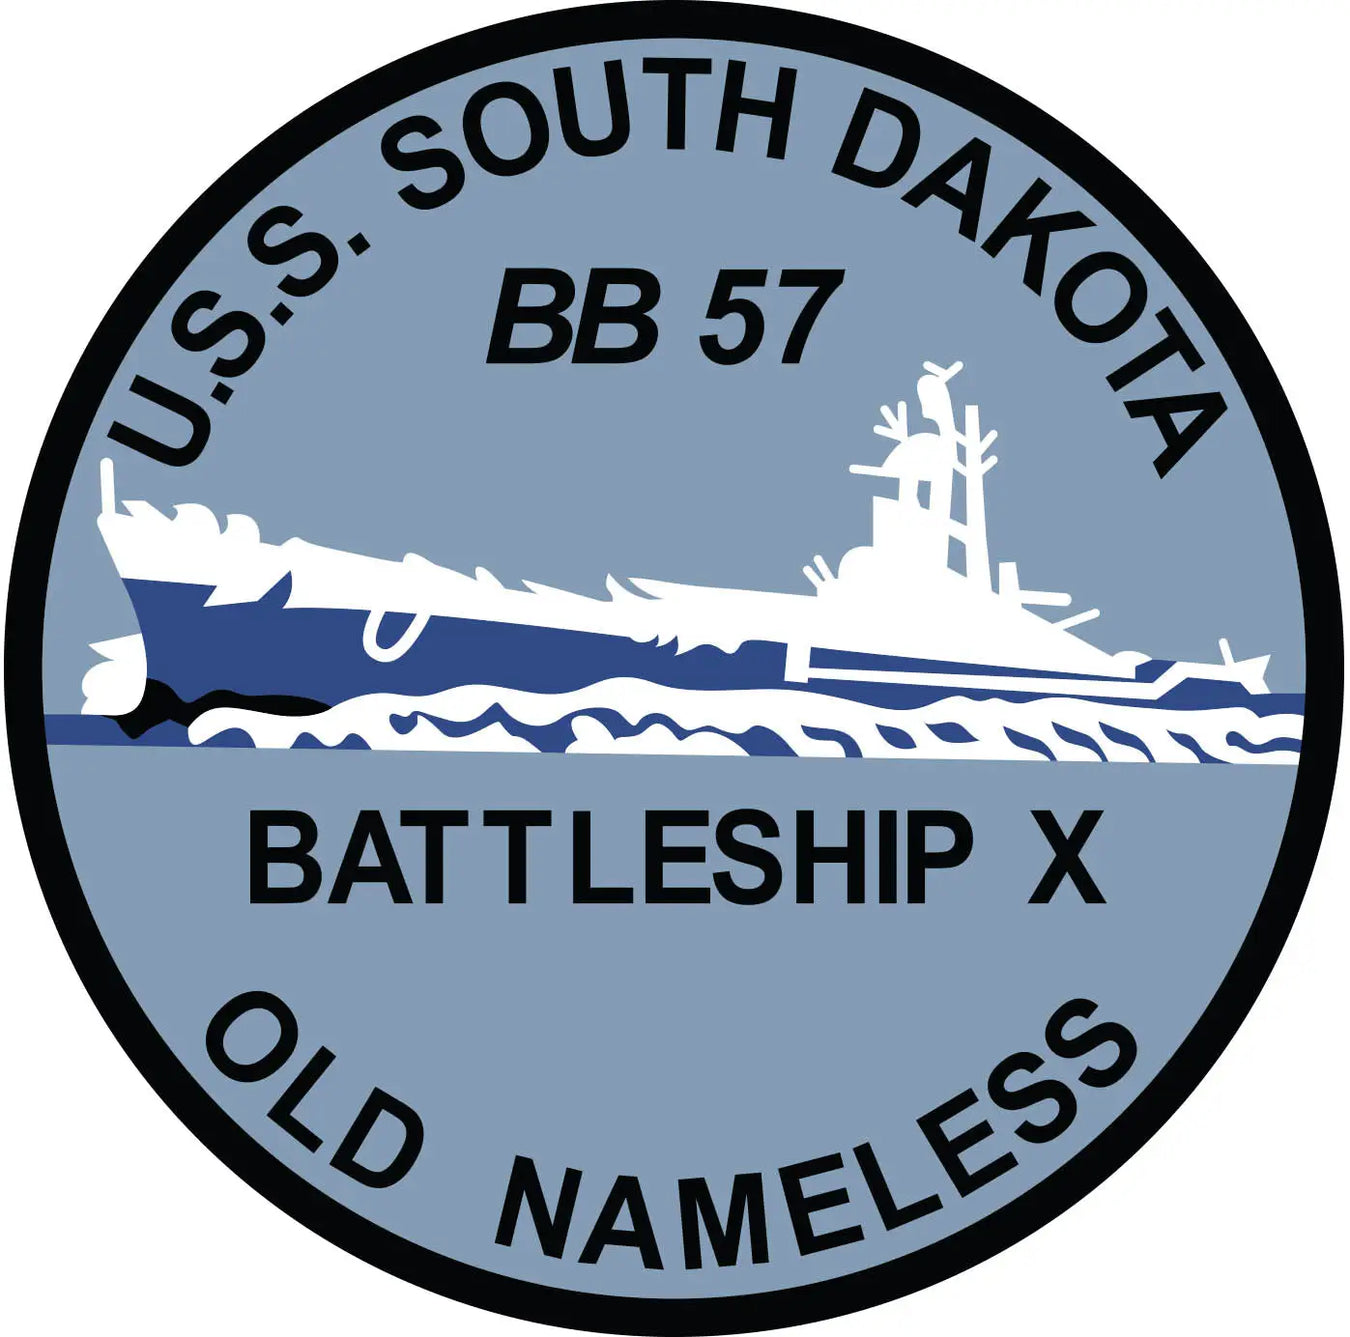 USS South Dakota (BB-57) Merchandise - Shop T-Shirts, hoodies, patches, pins, flags, decals, hats and more.